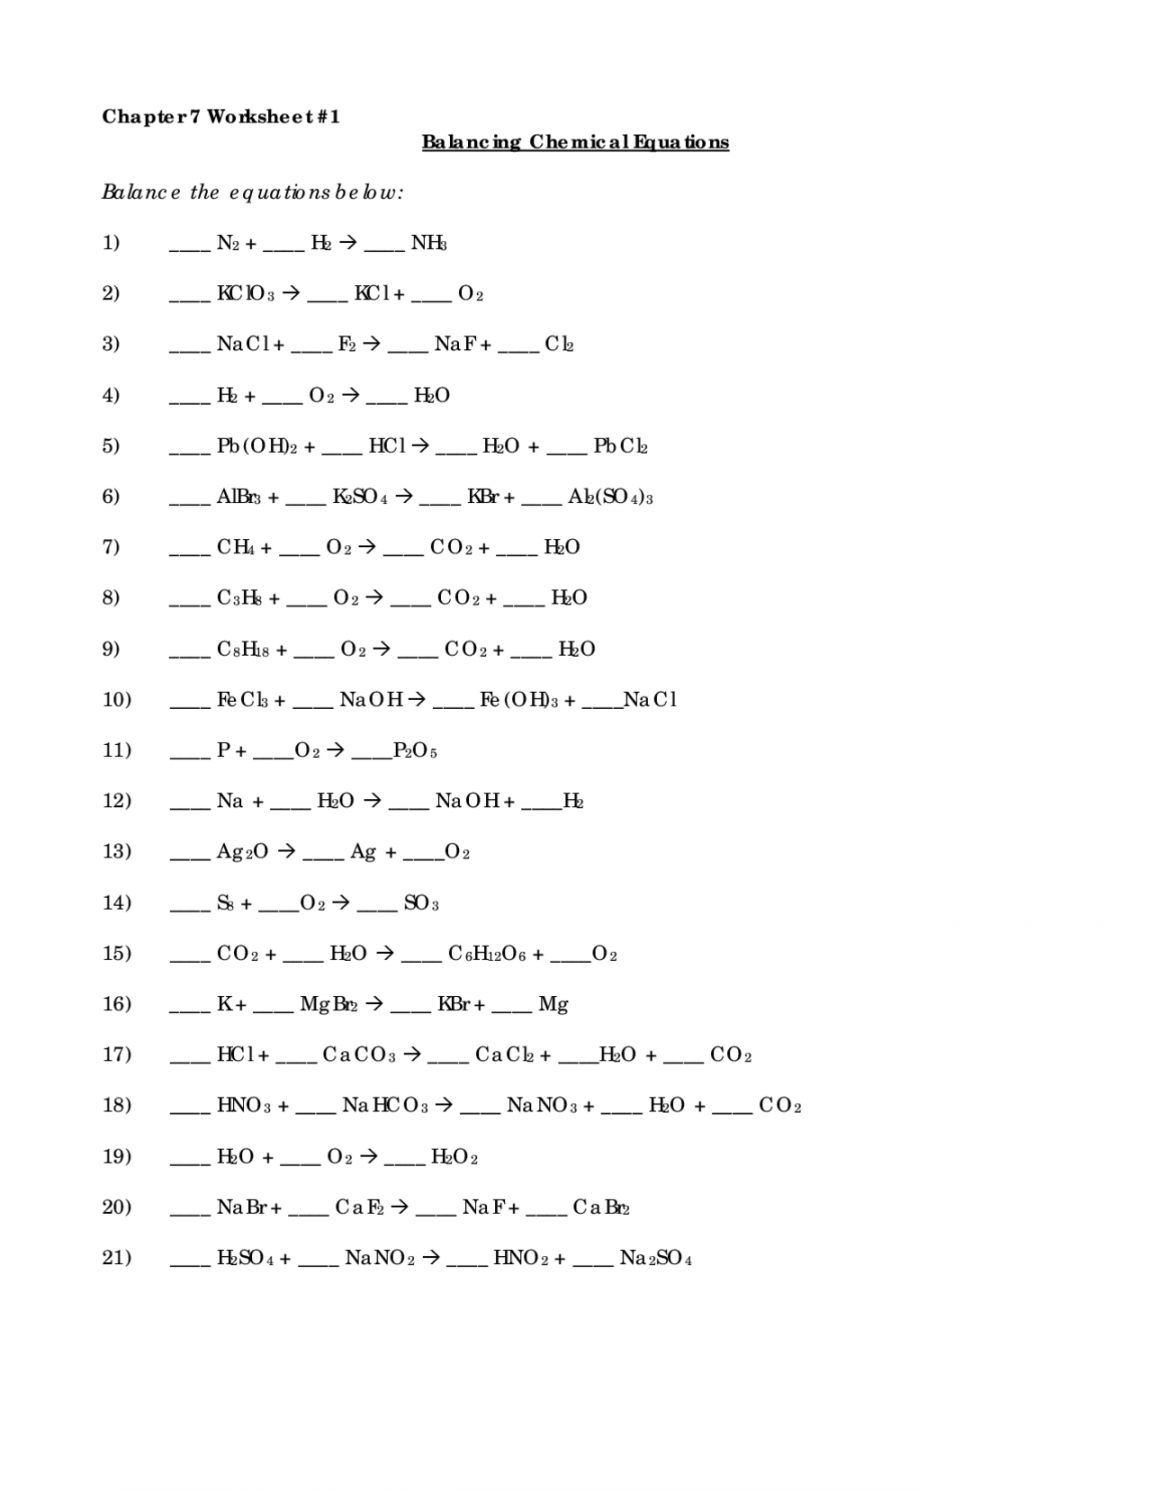 Chapter  Worksheet # Balancing Chemical Equations   Lecture